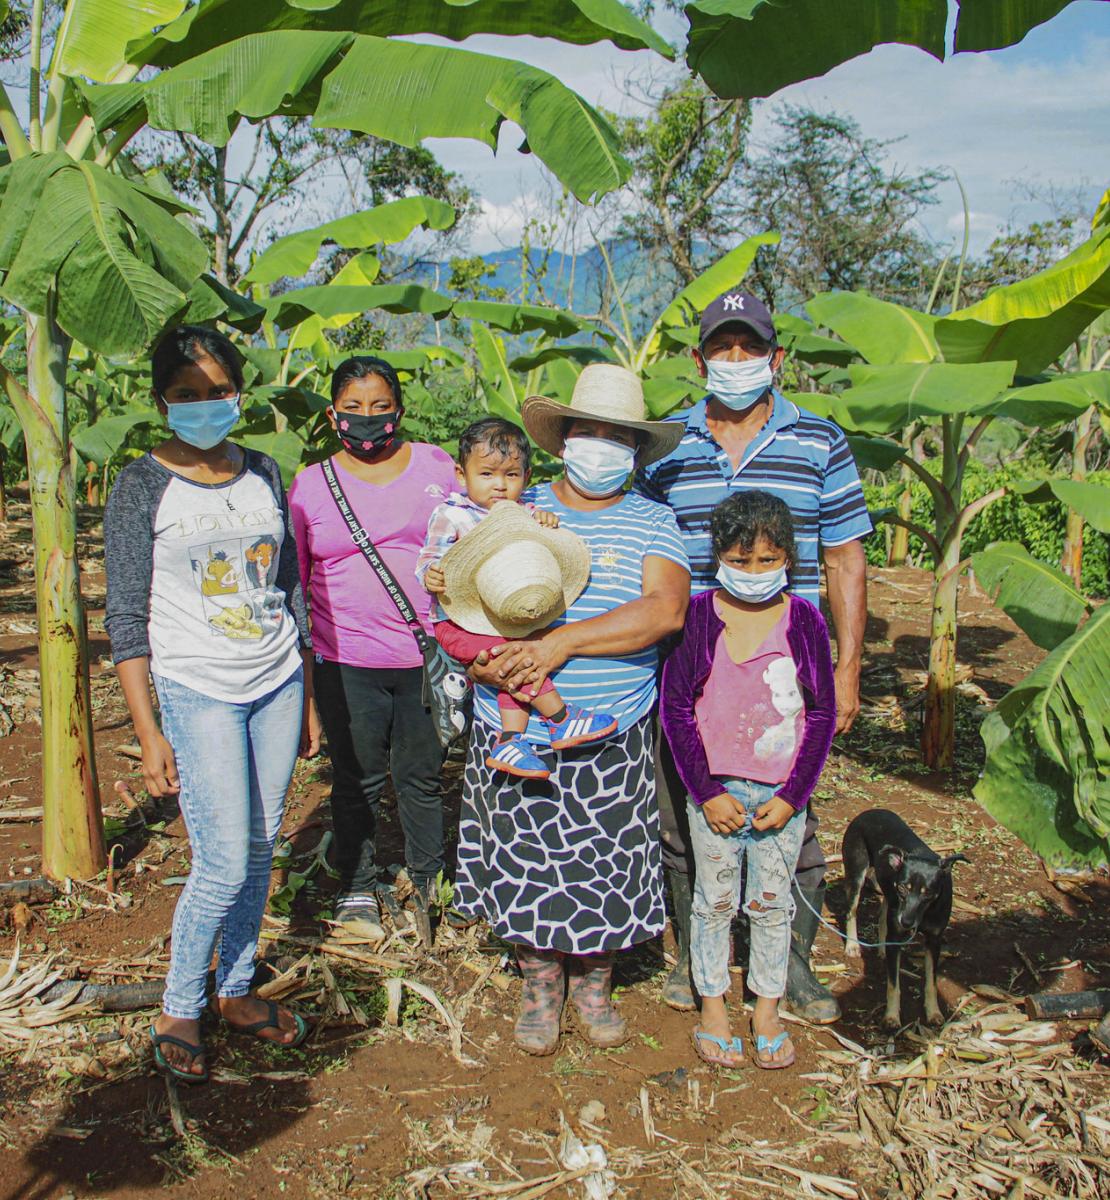 A family of six, wearing masks, in the middle of a crop field.